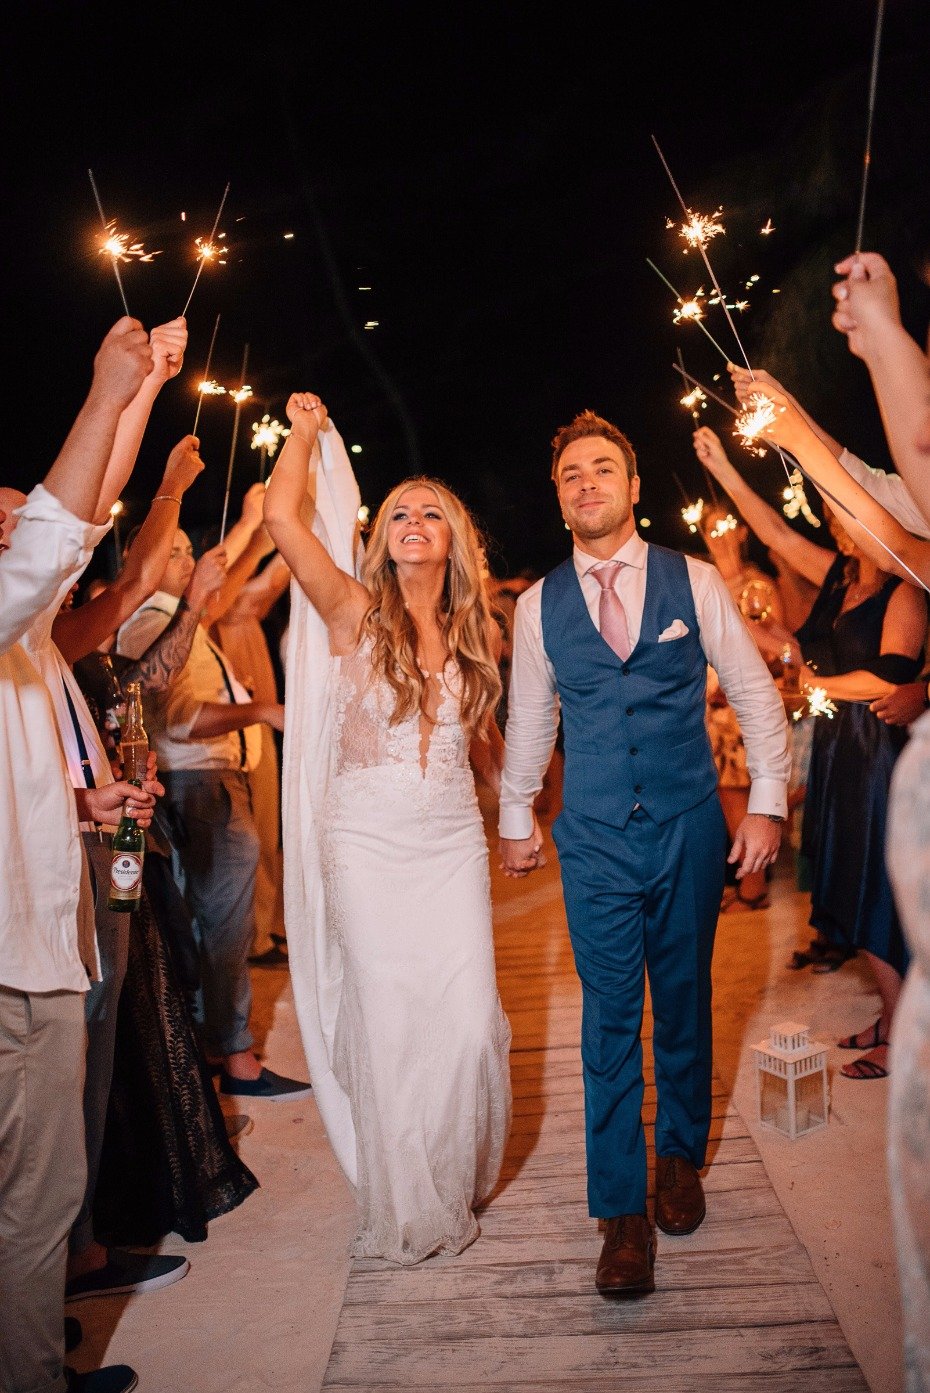 sparkler exit for the bride and groom at their beach wedding